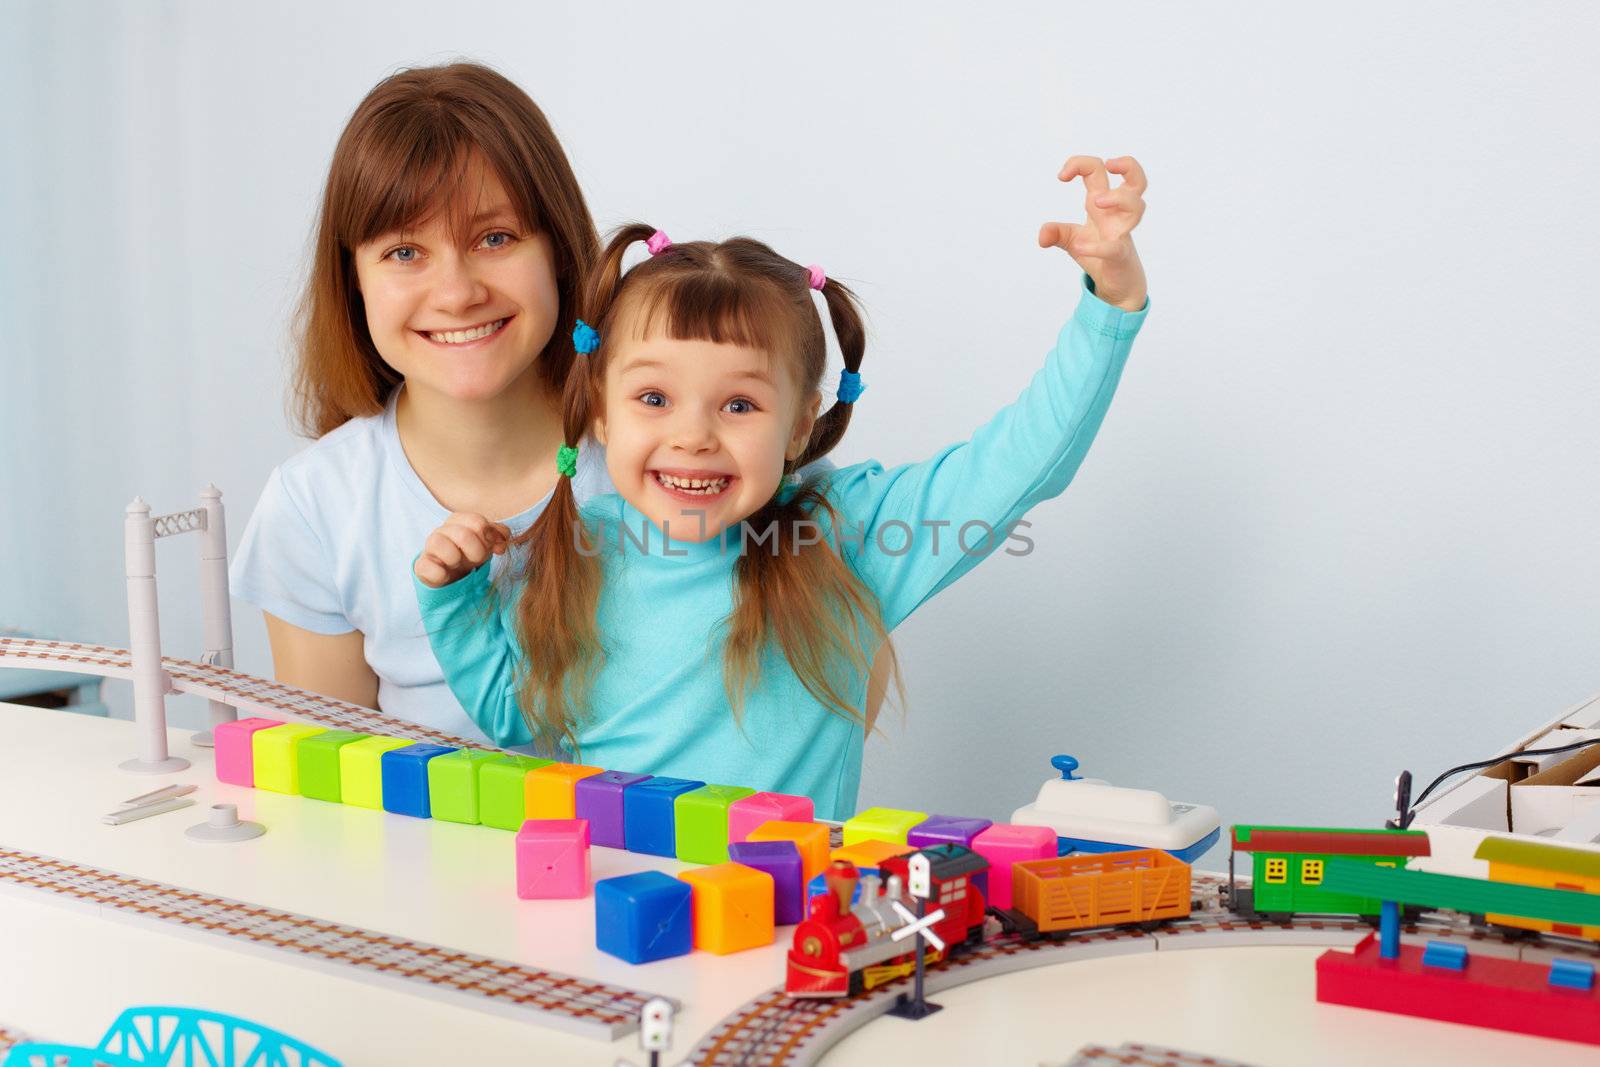 Mother and daughter having fun playing with toys